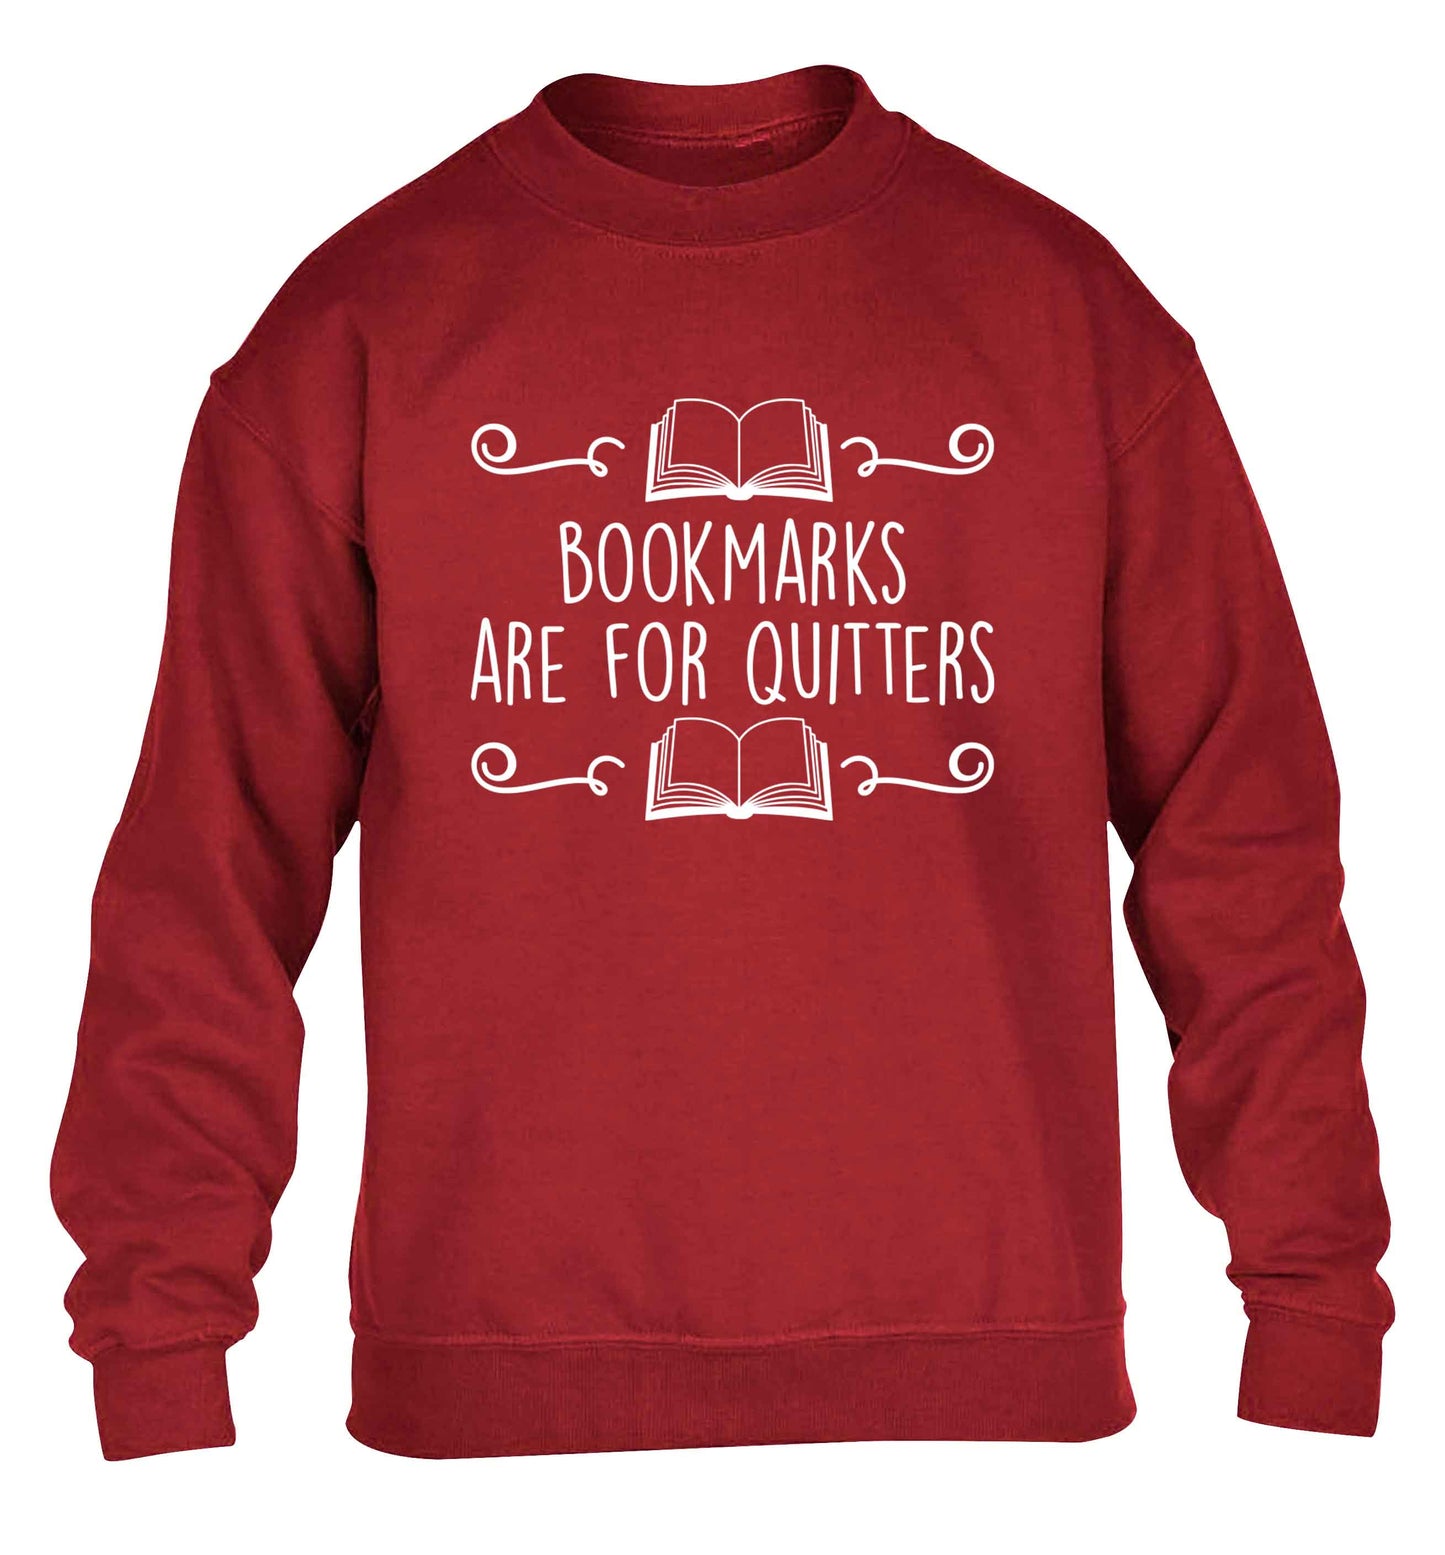 Bookmarks are for quitters children's grey sweater 12-13 Years